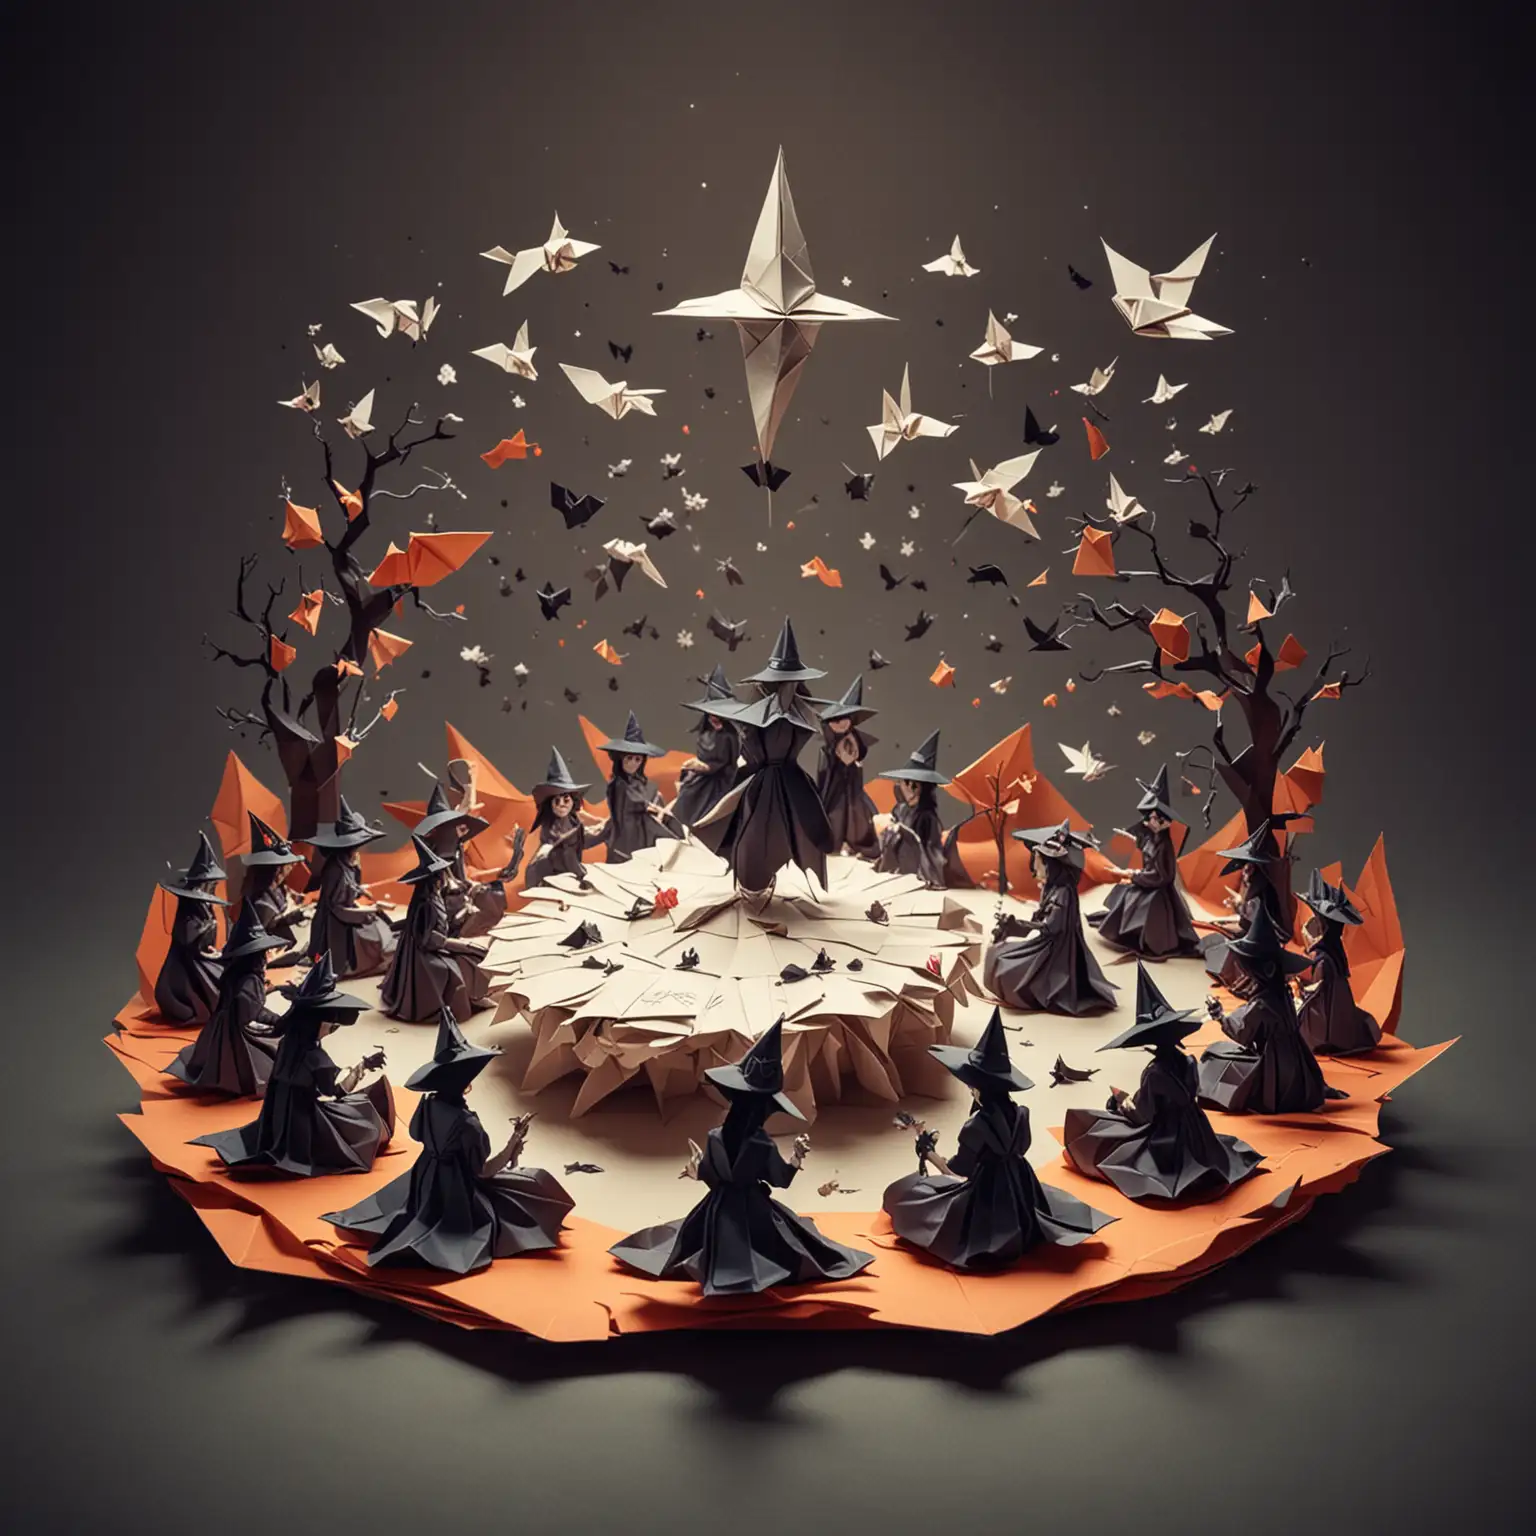 Witch seance in origami style. Witches around a couldron also in origami style